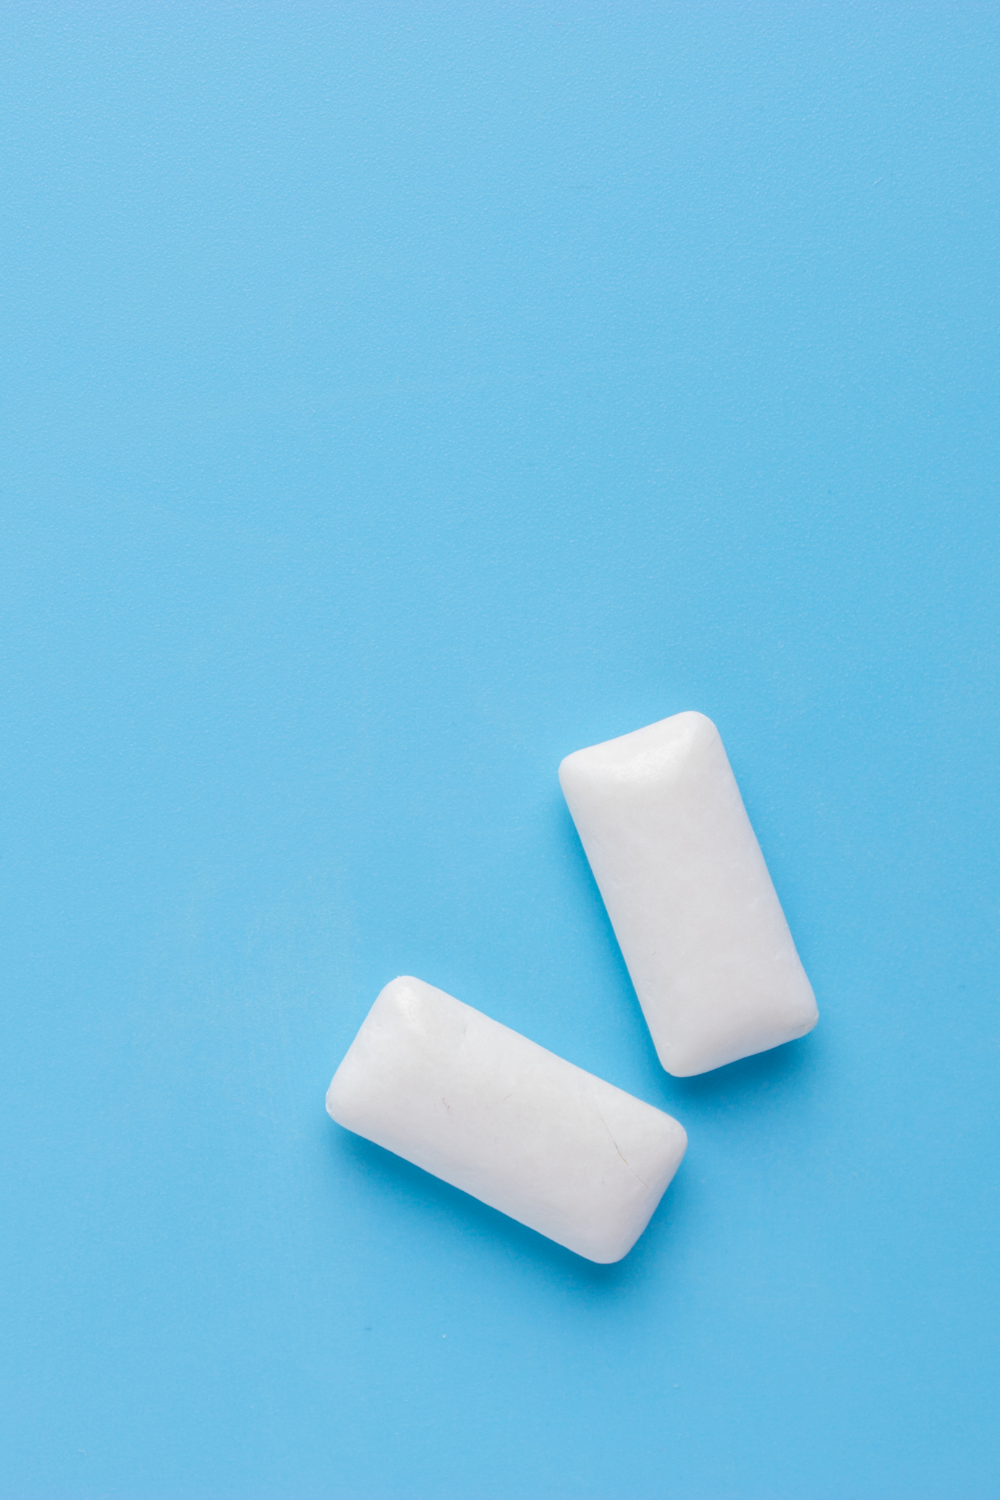 Does chewing gum have benefits